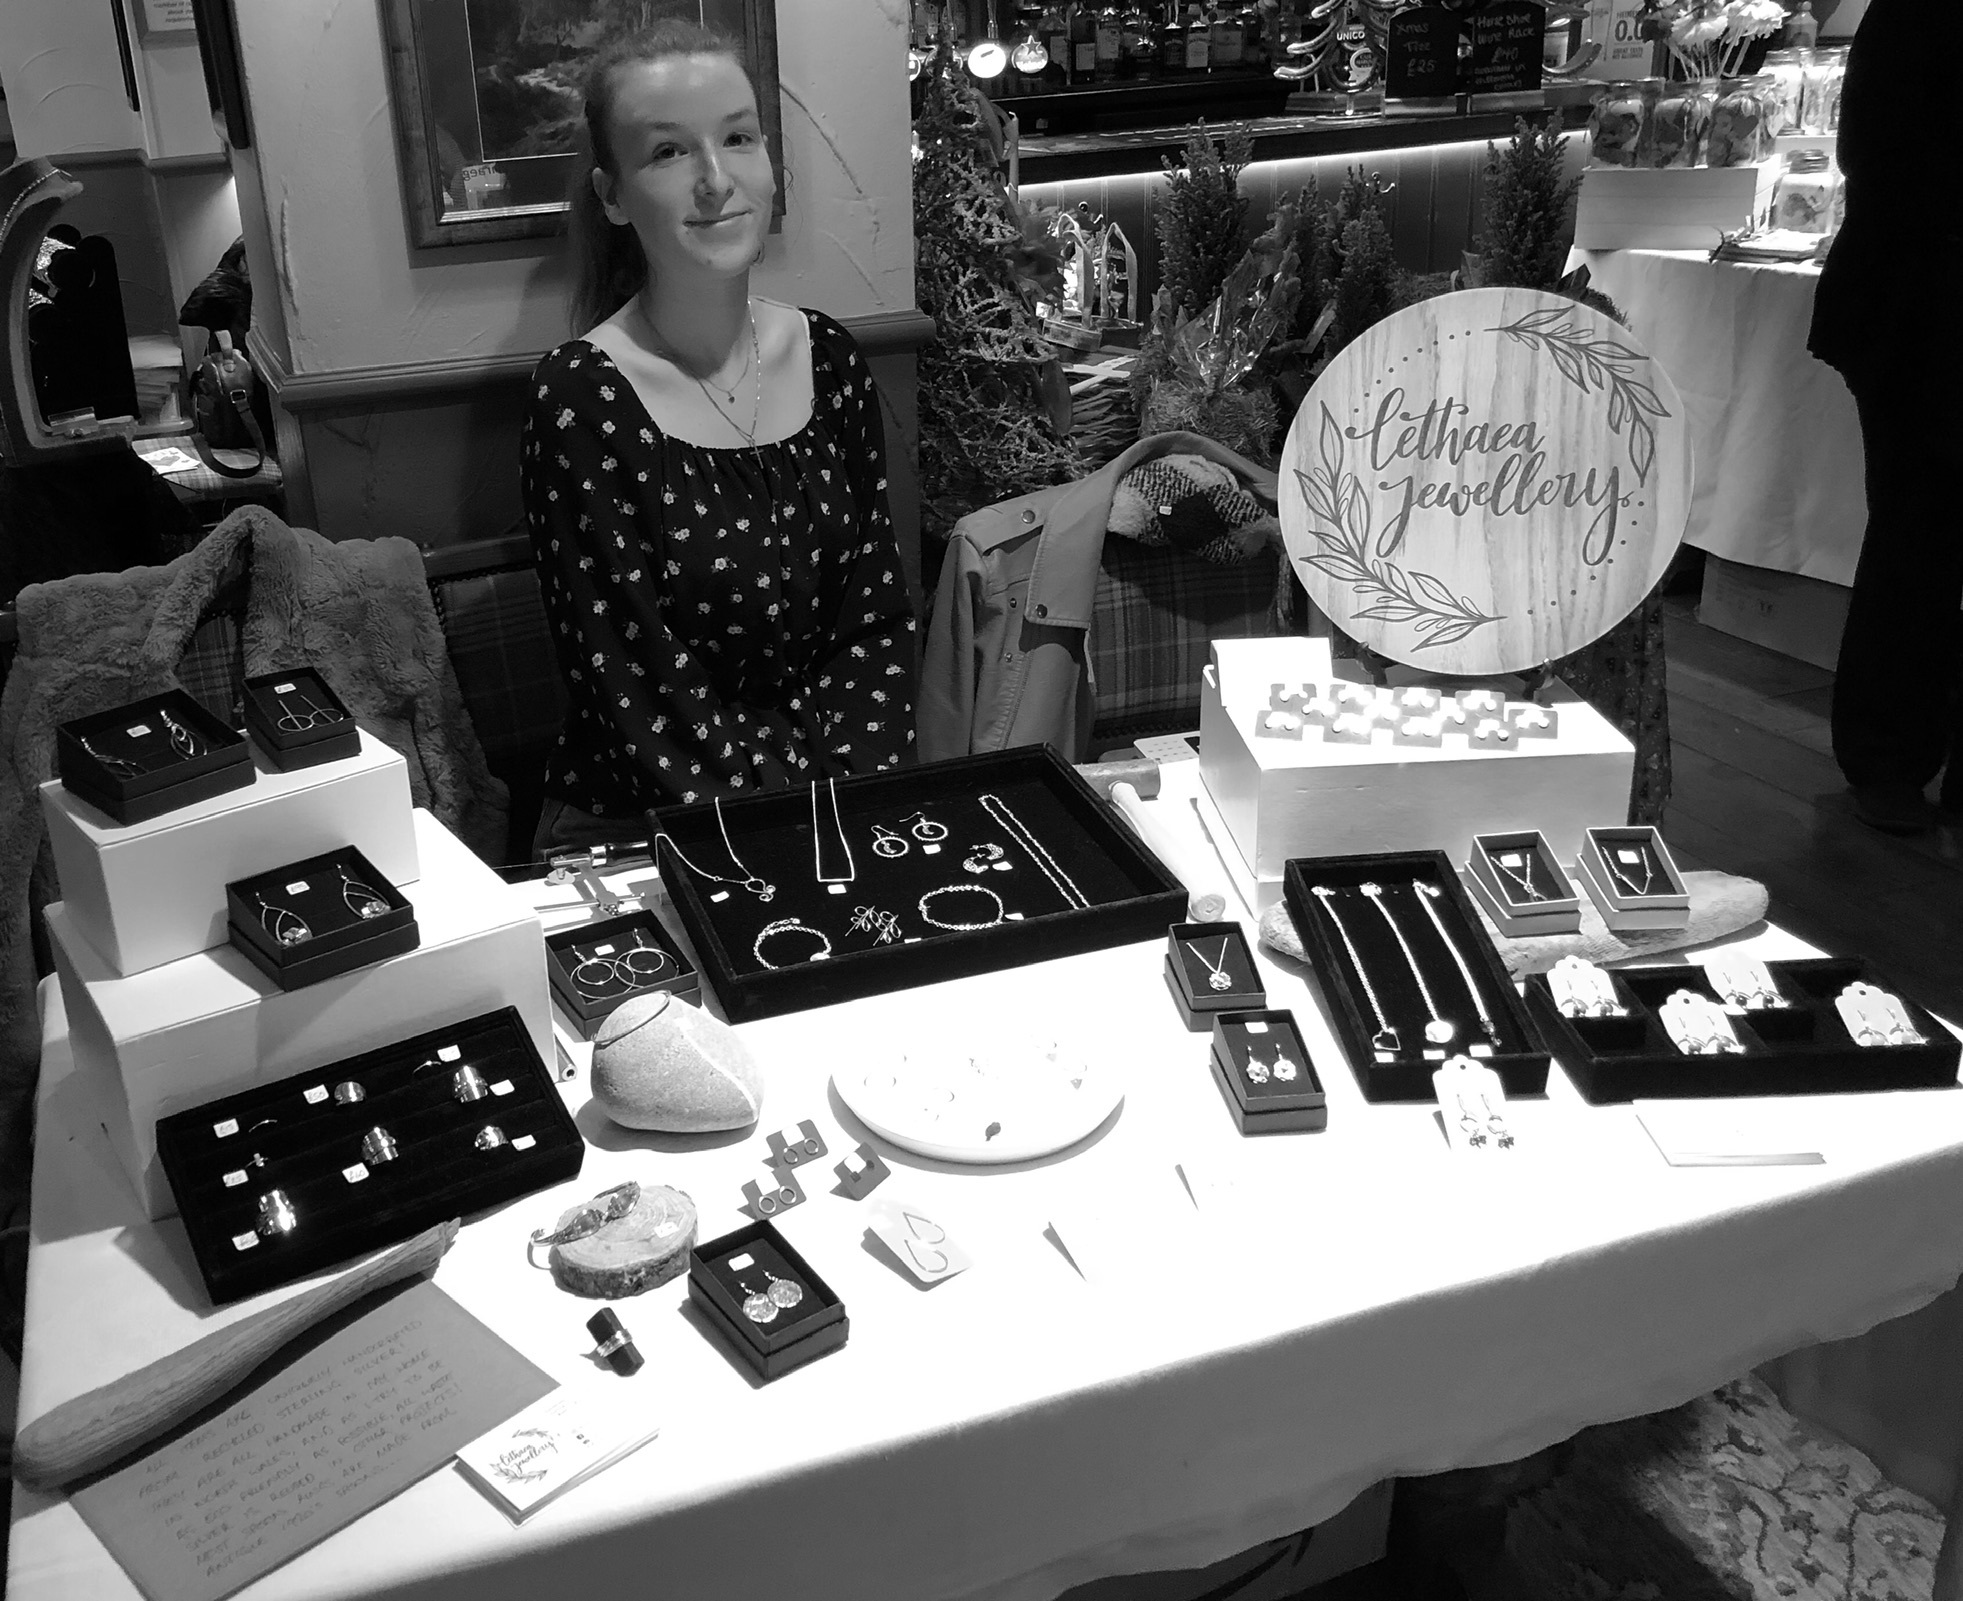 Shauna Stratton, owner and maker, at a stalls over winter last year.